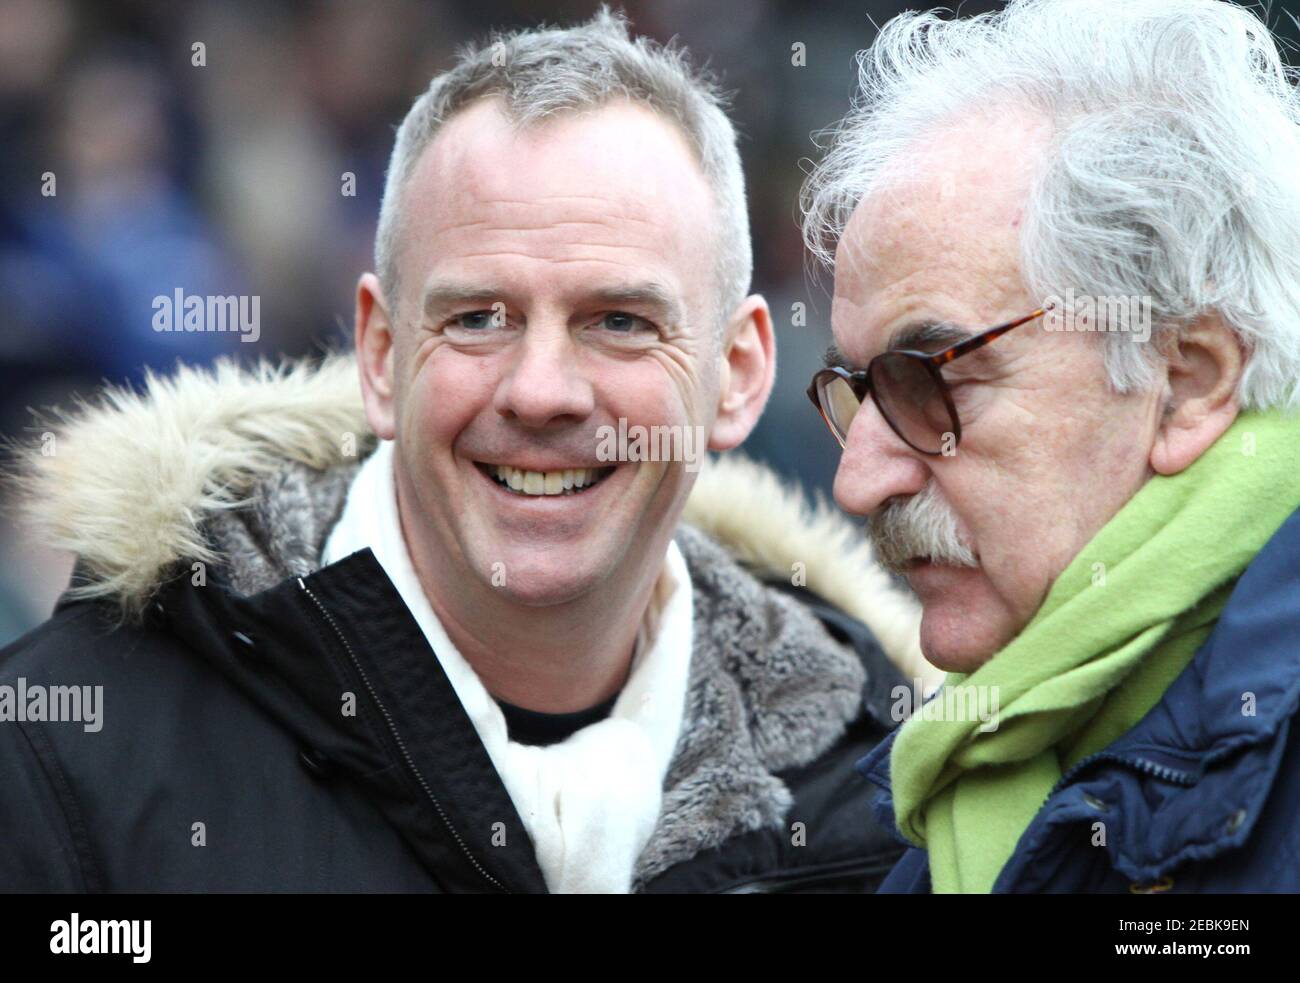 Football - Brighton & Hove Albion v Norwich City - Coca-Cola Football League One - Withdean Stadium Brighton - 09/10 - 13/2/10  Des Lynam and Norman Cook (aka Fat Boy Slim)   Mandatory Credit: Action Images / Paul Hazlewood Stock Photo